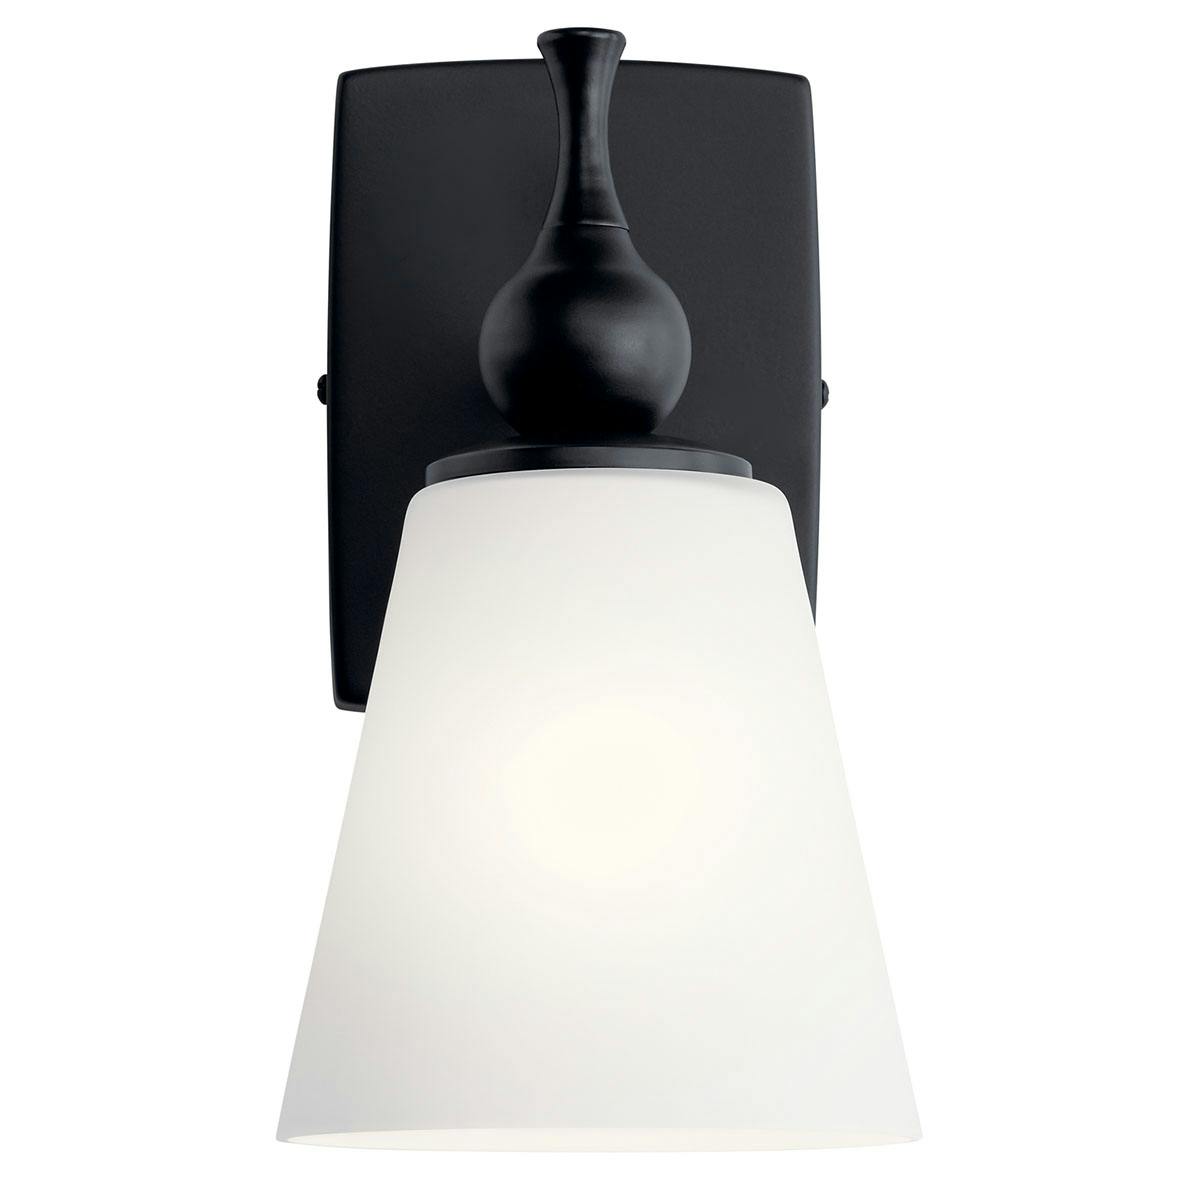 Front view of the Cosabella 6" Sconce in a Black finish on a white background